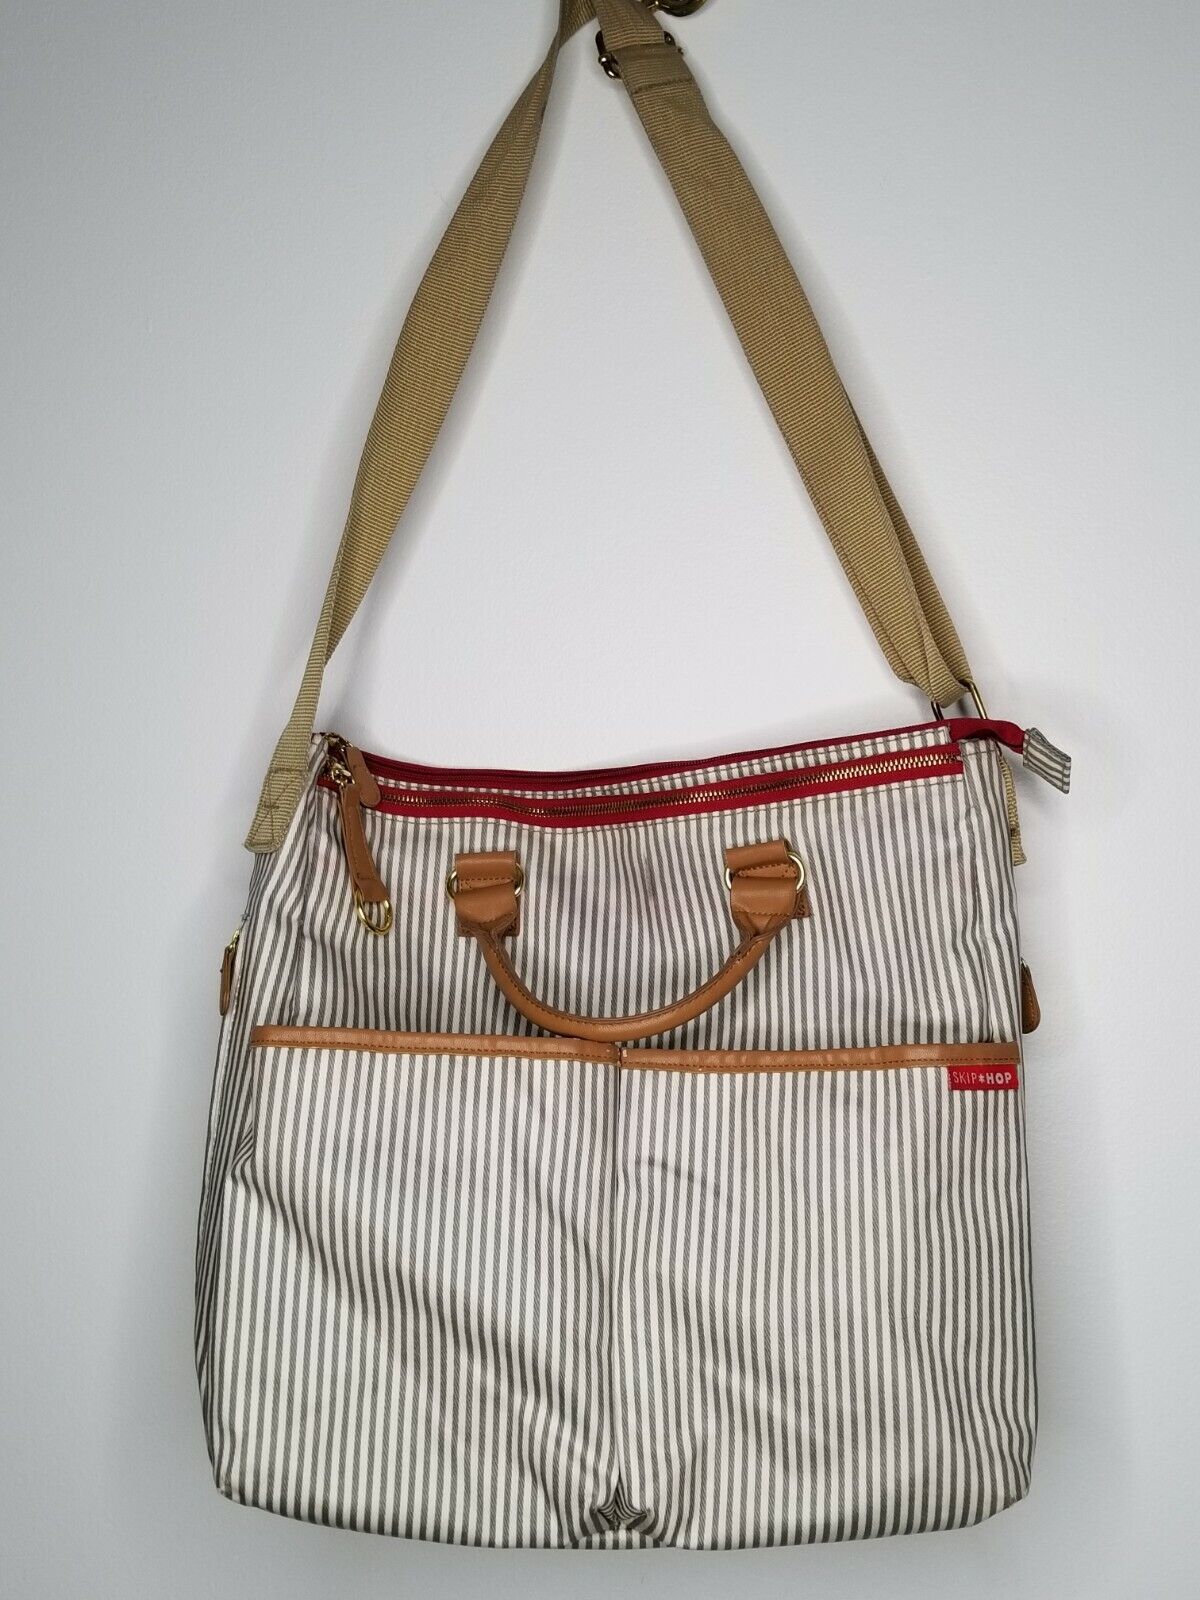 Skip Hop Messenger Diaper Bag Tote Gray French Striped Multiple Pockets Classic - $14.99